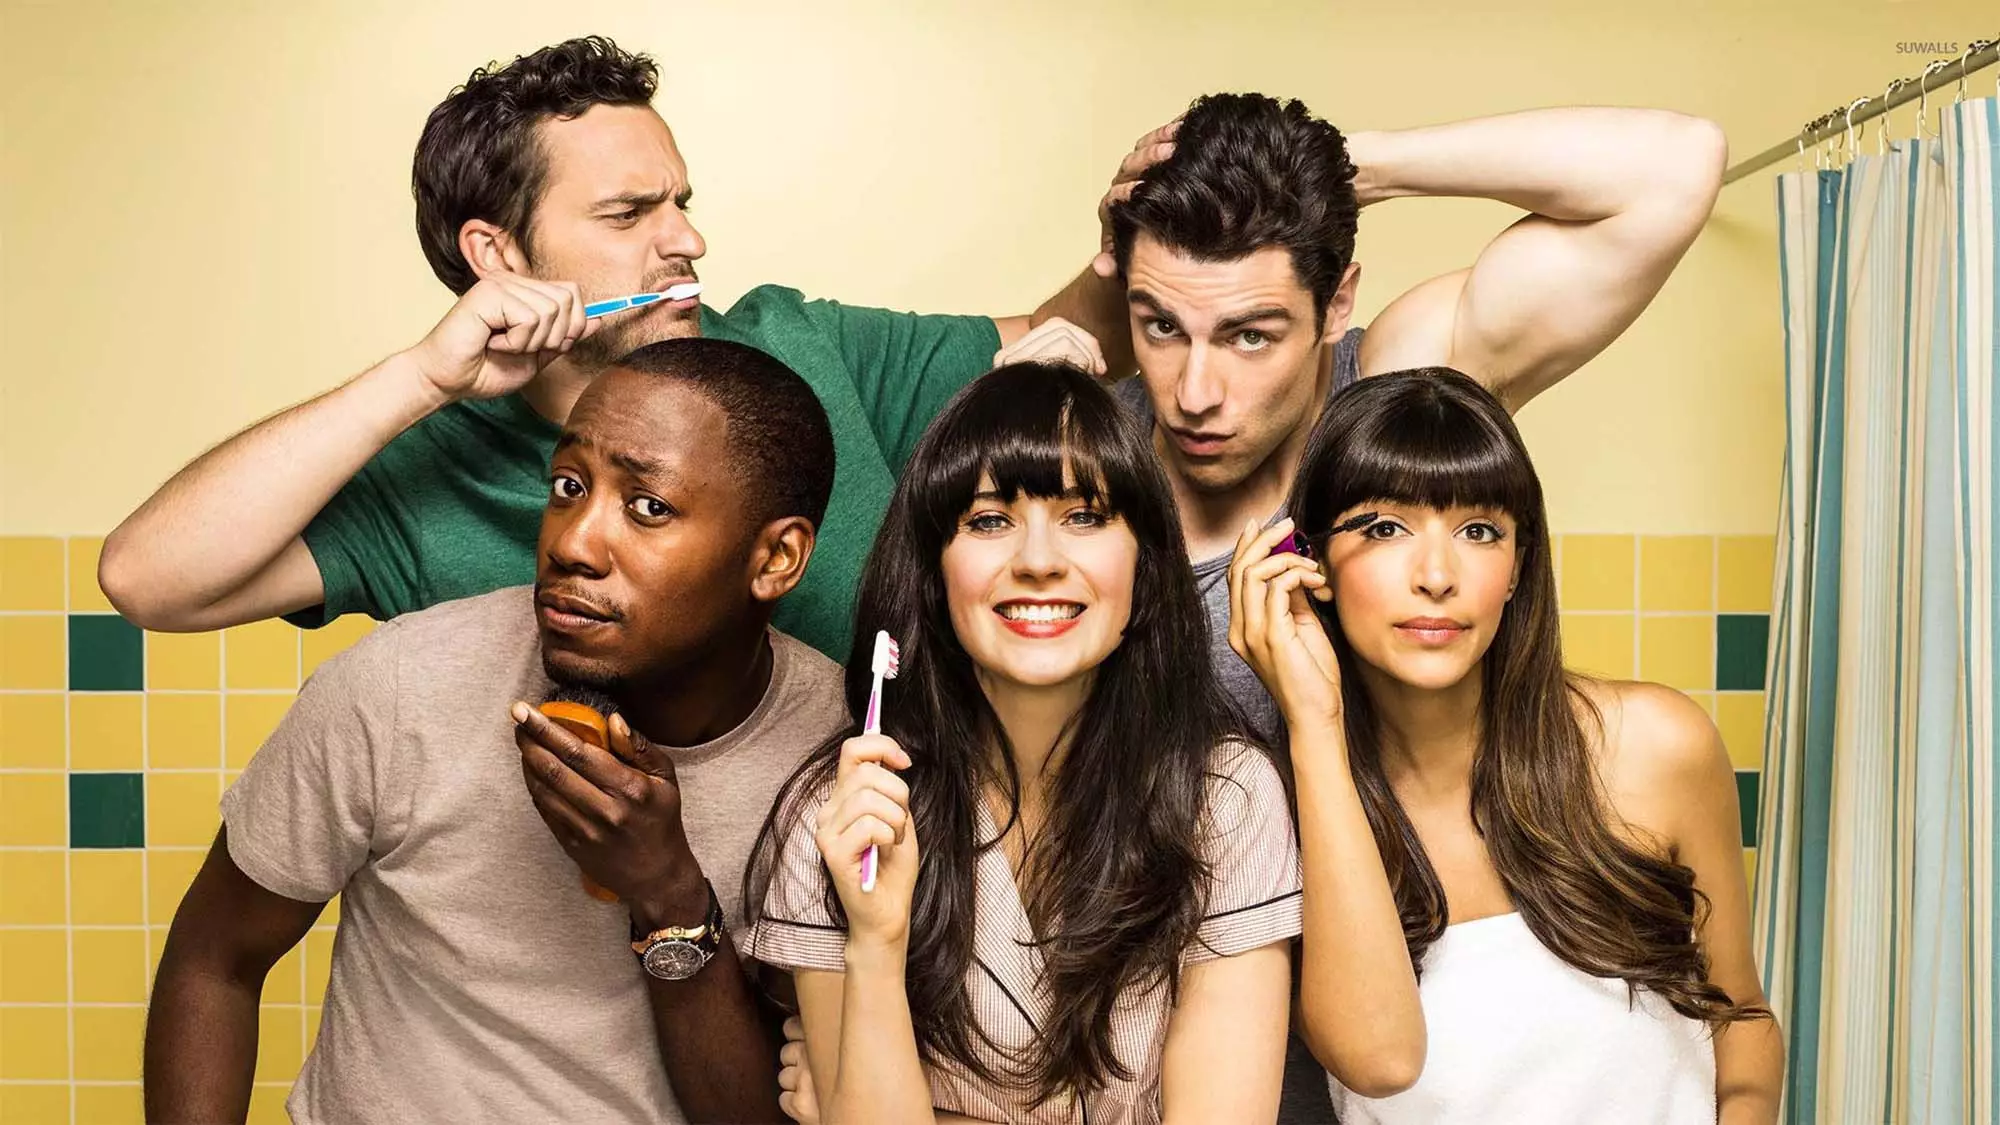 If you liked 'New Girl' you'll love this (